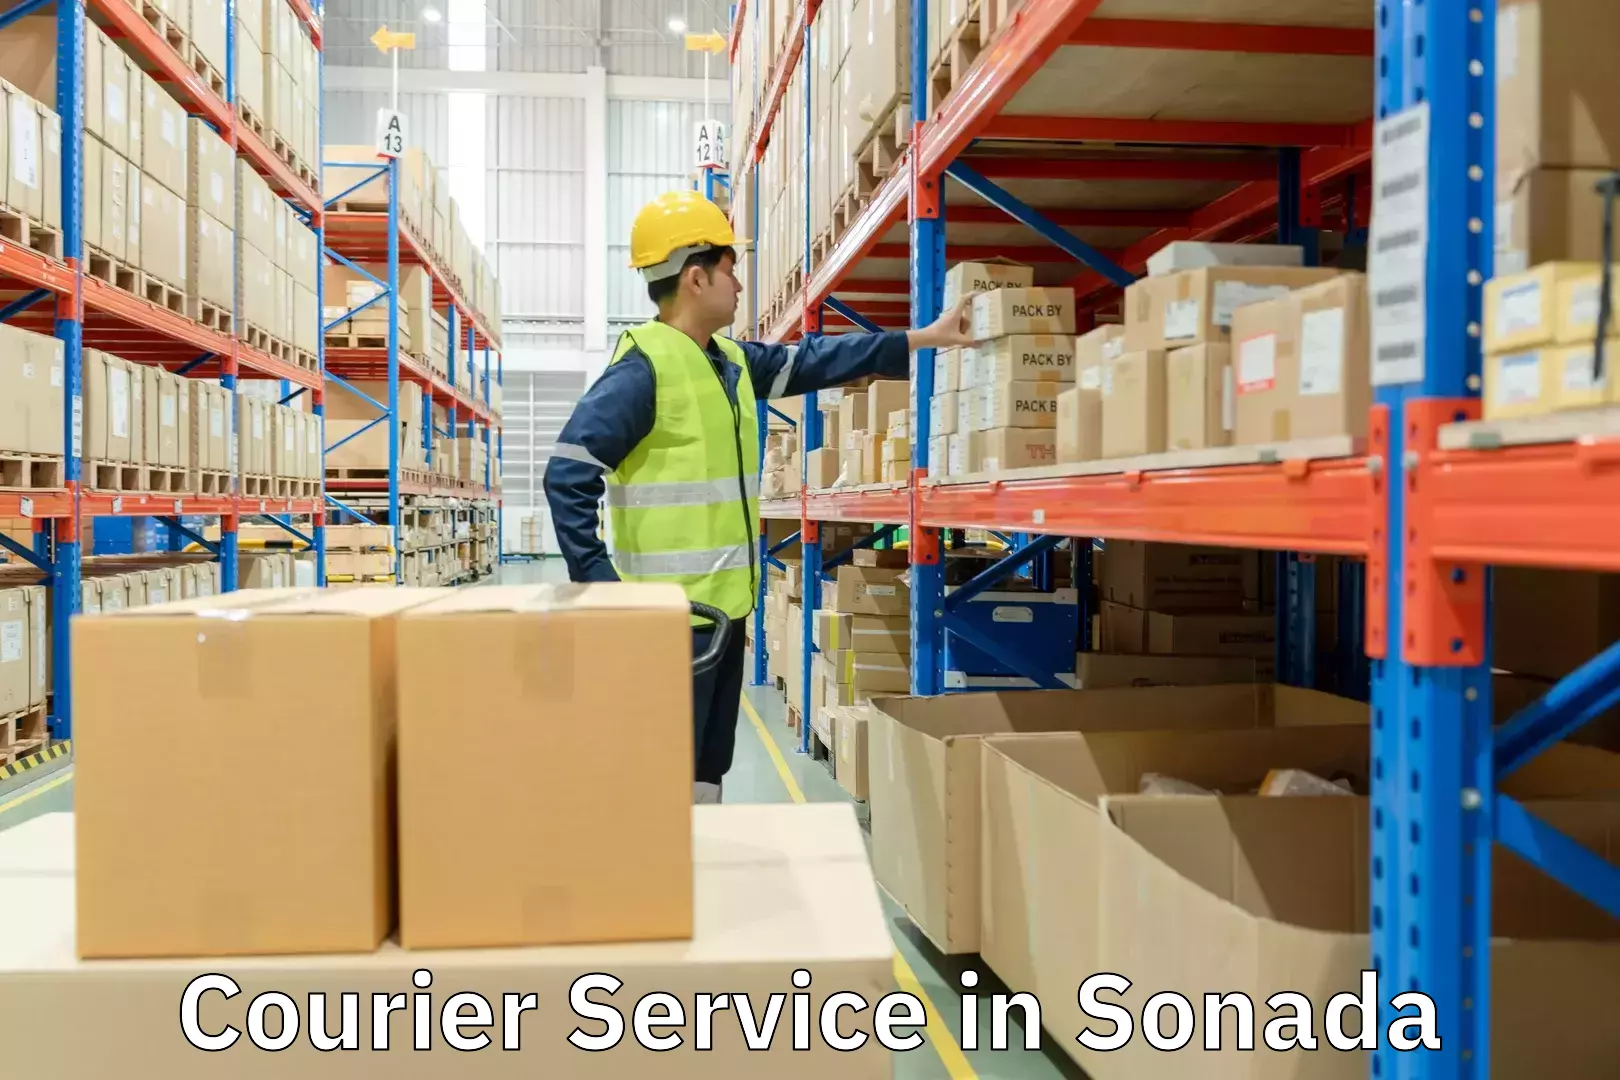 24-hour courier services in Sonada